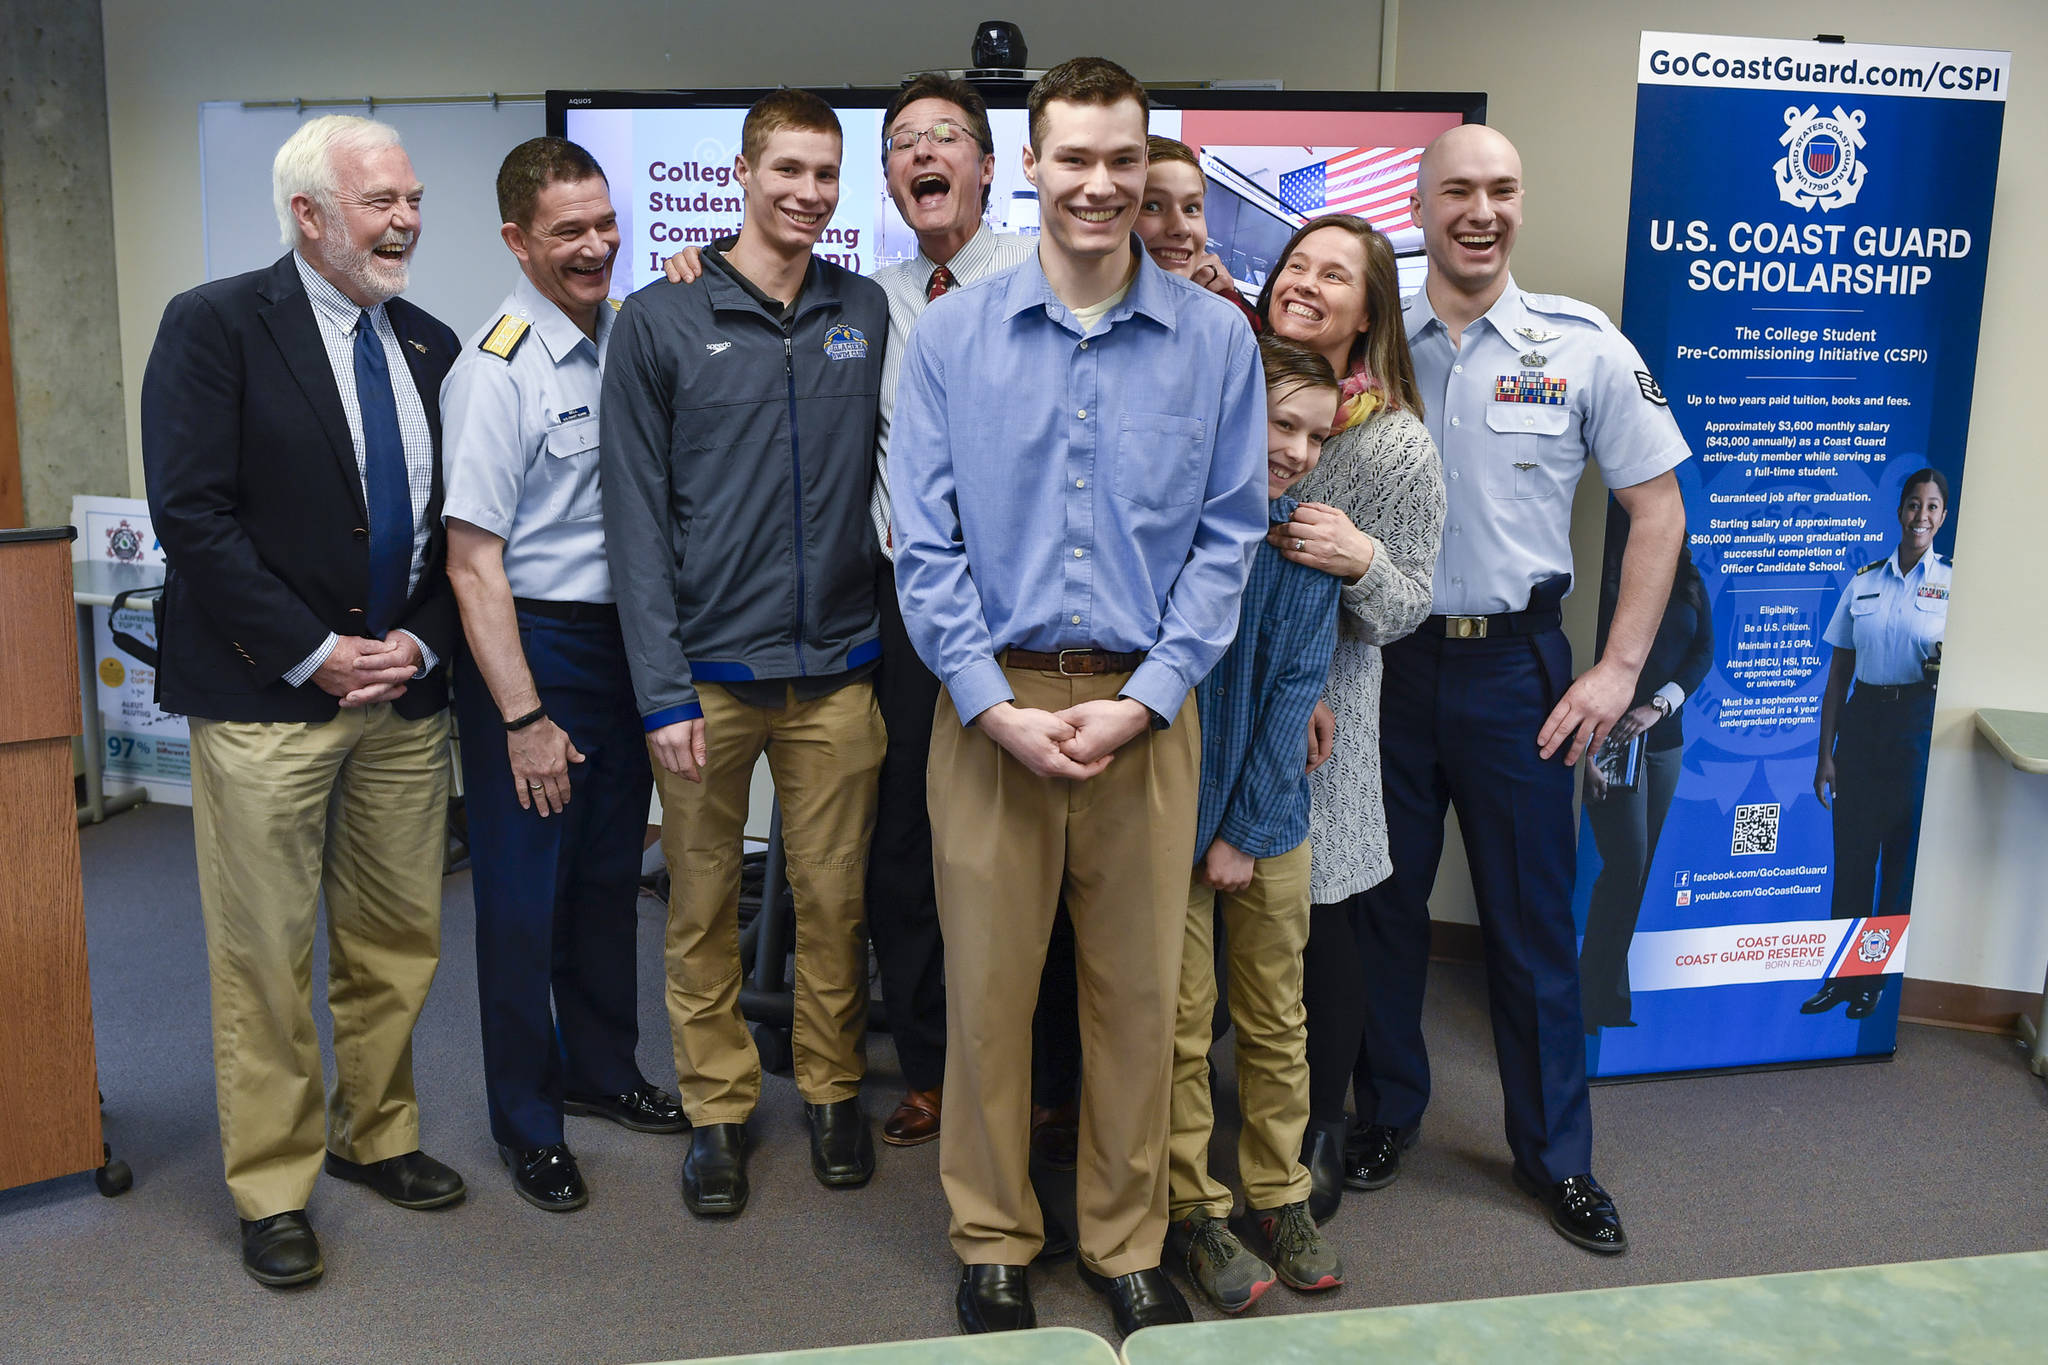 Logan Holt, 21, a business major at the University of Alaska Southeast, is surrounded by his family after being sworn into the U.S. Coast Guard by Rear Admiral Matthew Bell Jr., commander of the 17th Coast Guard District, second from left, and watched by UAS Chancellor Rick Caulfield, left, at UAS on Tuesday, April 9, 2019. Holt is the first recruit from UAS to be accepted into the Coast Guard’s College Student Pre-Commissioning Initiative program. (Michael Penn | Juneau Empire)